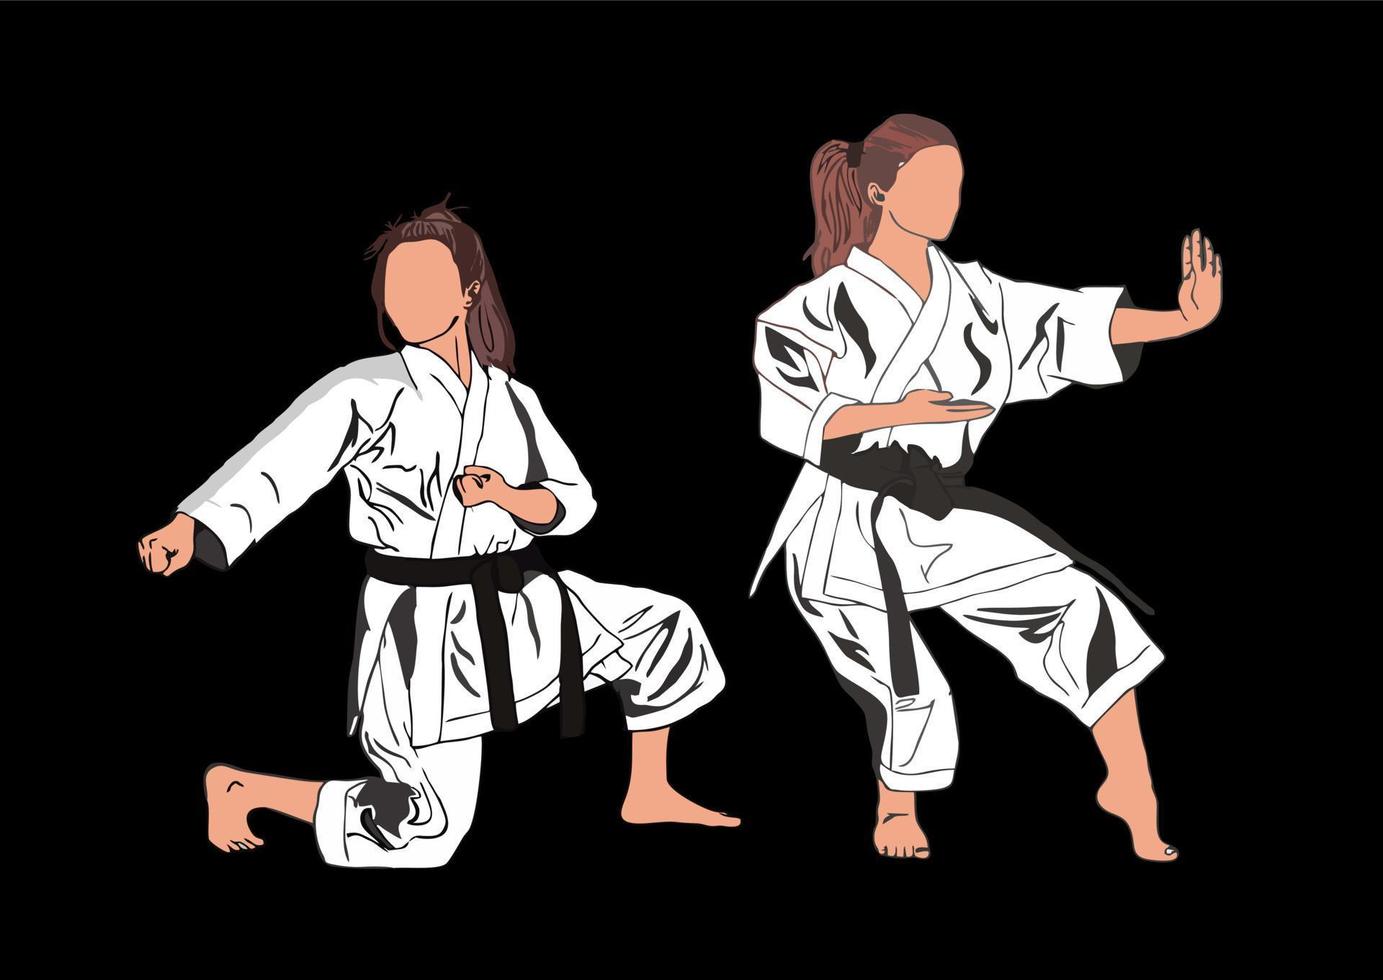 karate illustration vector logo icon club and t-shirt